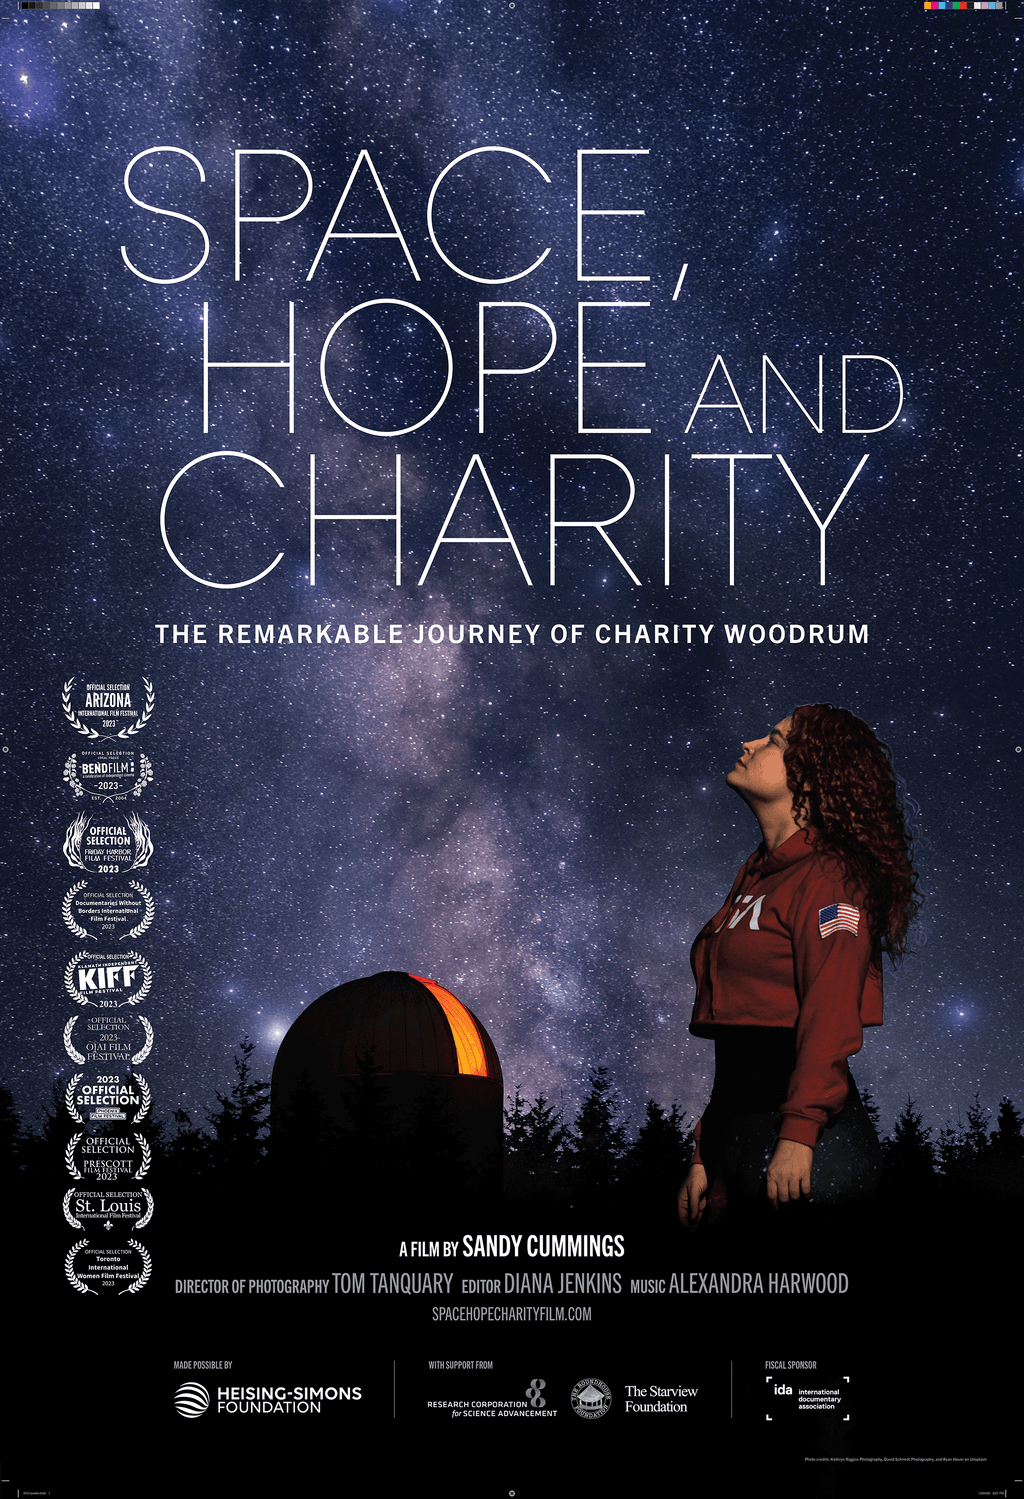 Space, Hope and Charity